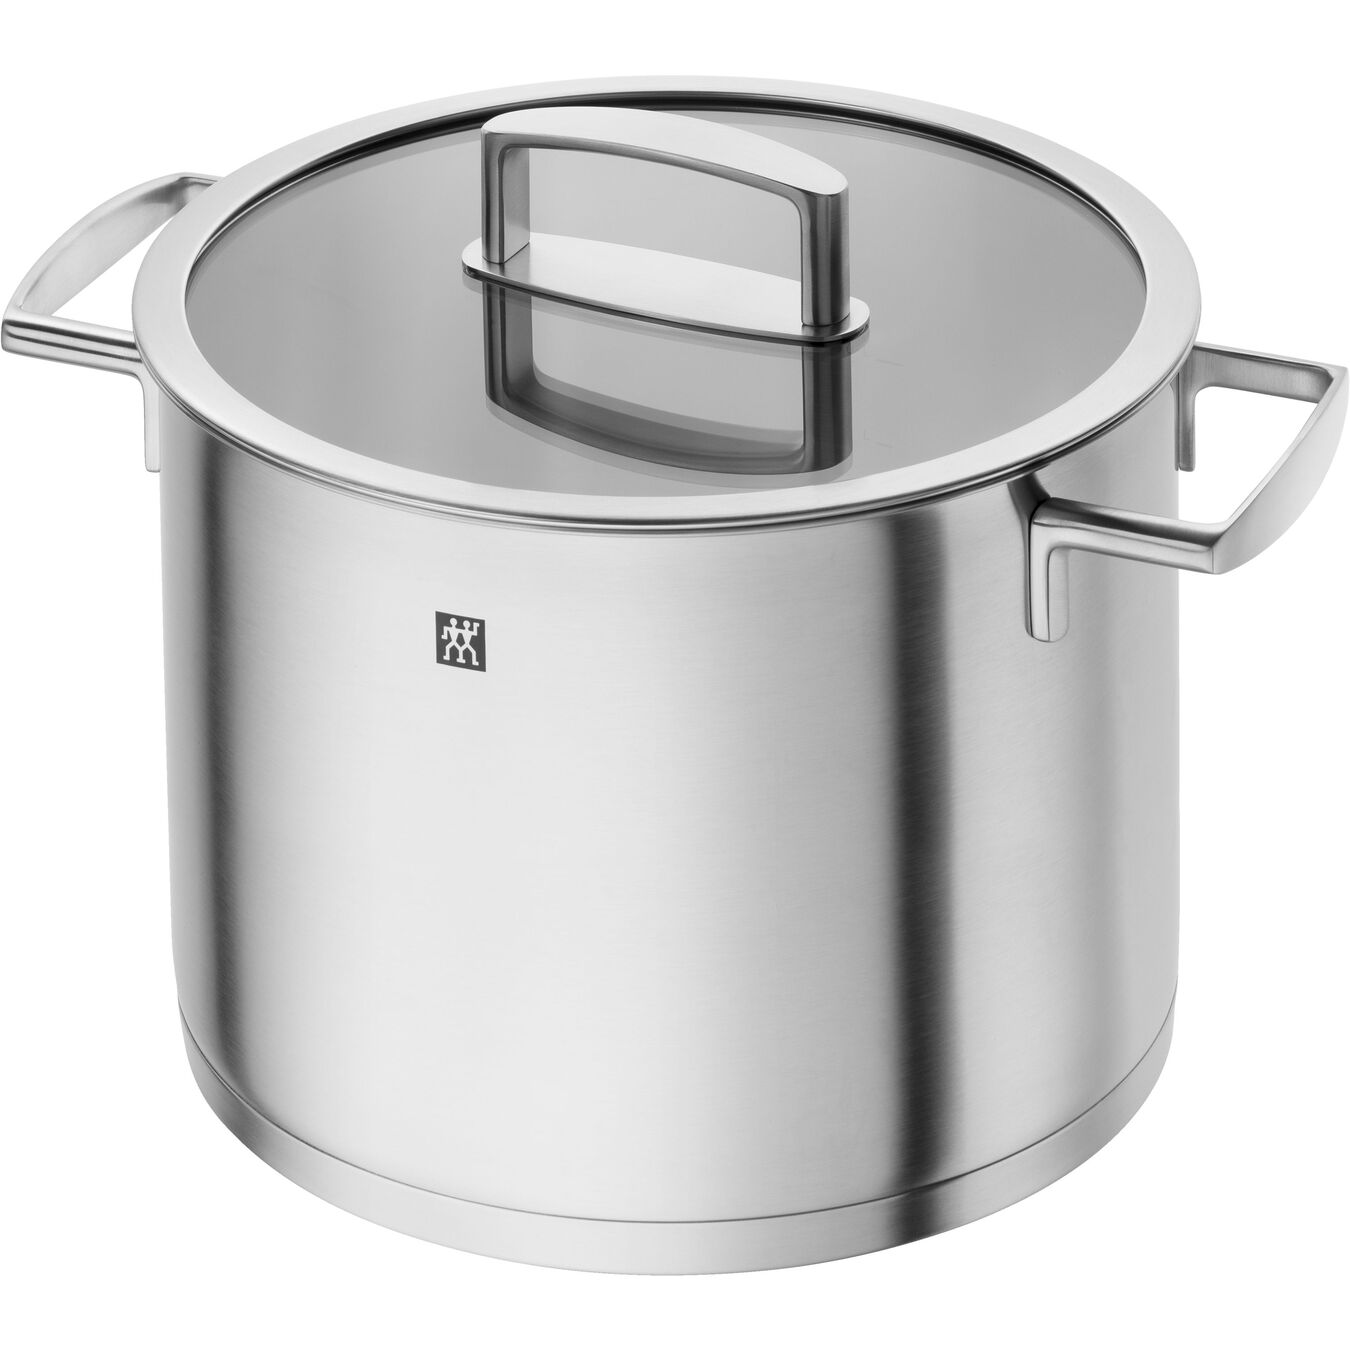 Vitality Stainless Steel Stock Pot - 8 L